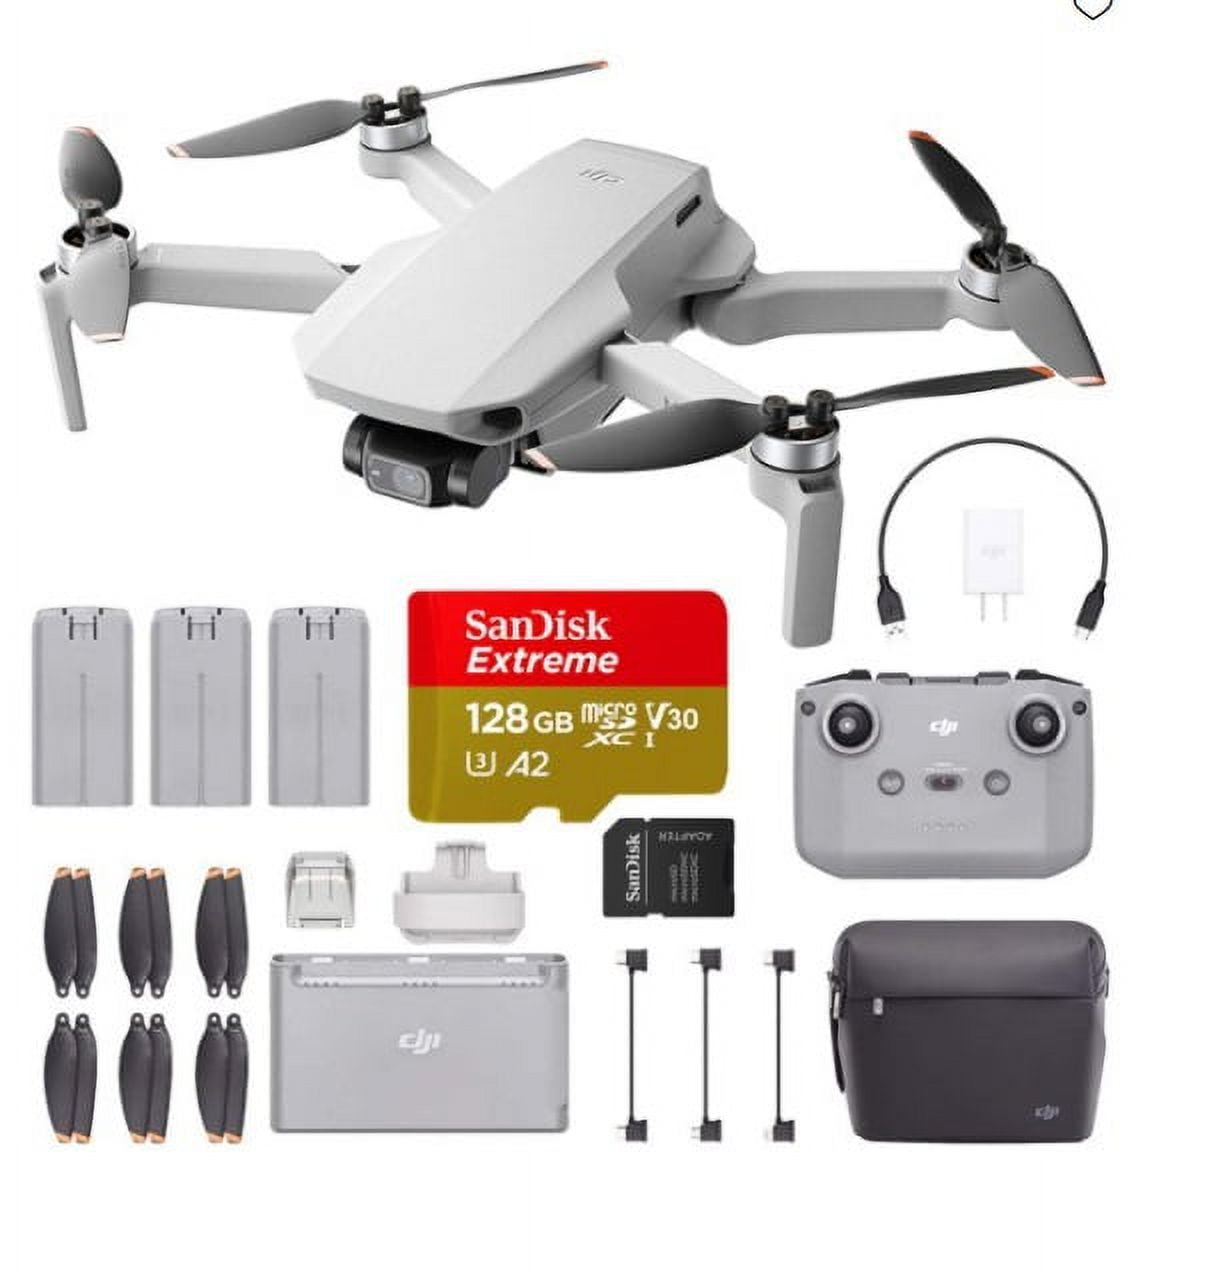  DJI Mini 2 – Ultralight and Foldable Drone Quadcopter, 3-Axis  Gimbal with 4K Camera, 12MP Photo, 31 Mins Flight Time, OcuSync 2.0 10km HD  Video Transmission, QuickShots Gray : Toys & Games